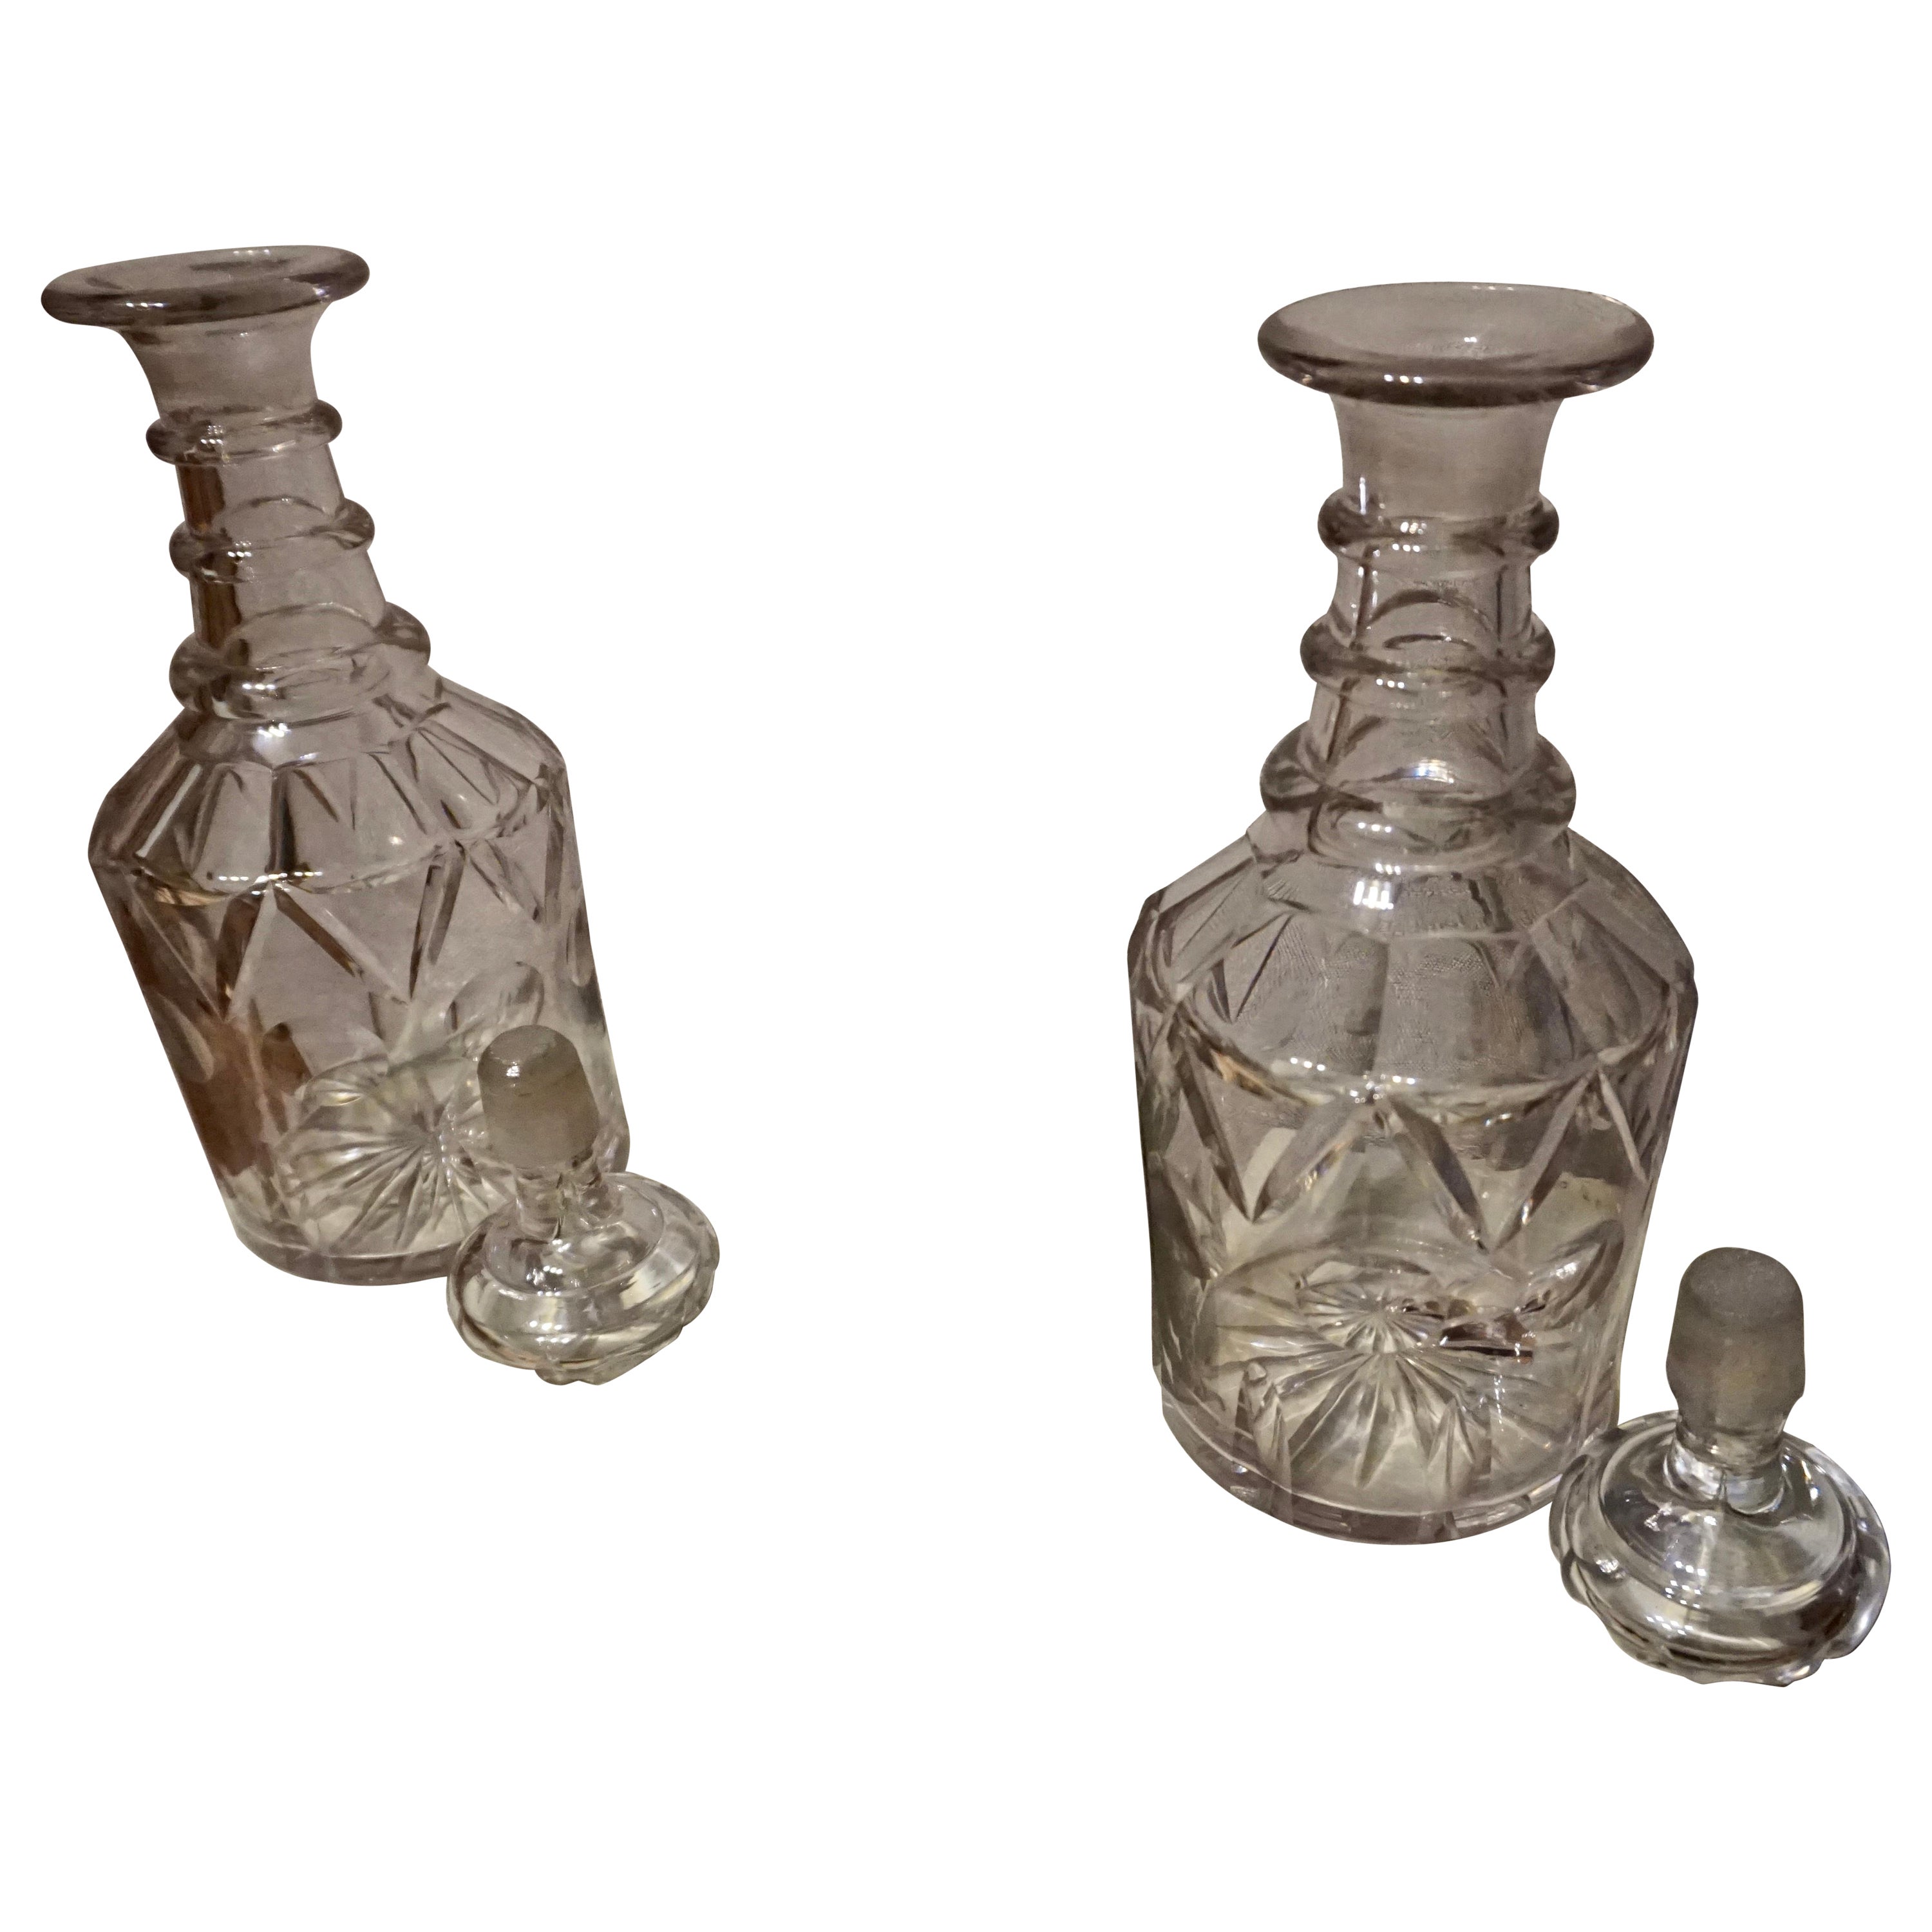 Pair of Three Ringed Distinguished Georgian Cut Glass Decanters